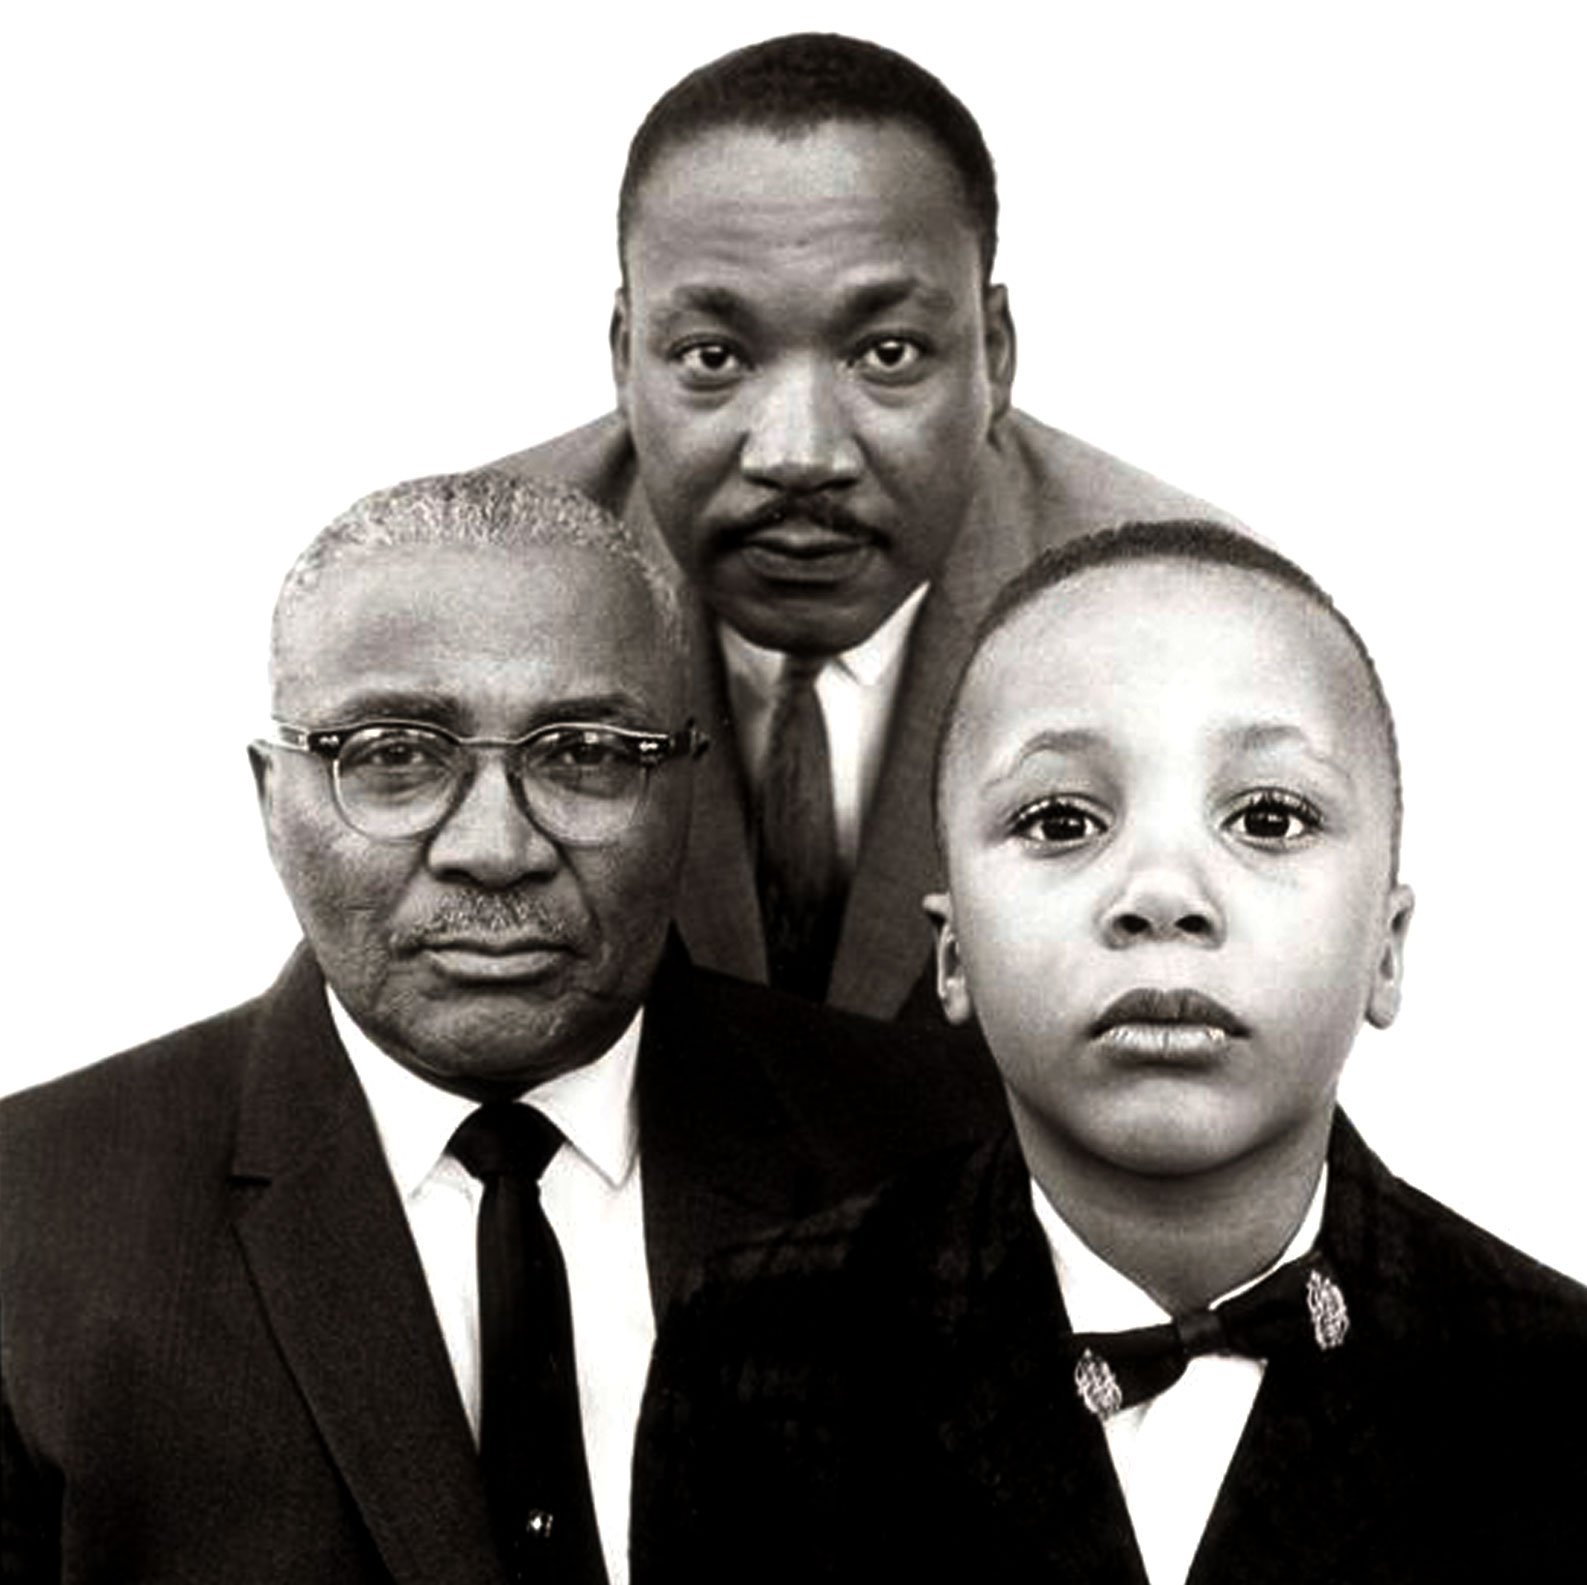 Martin Luther King Jr with Father and Son - 1963